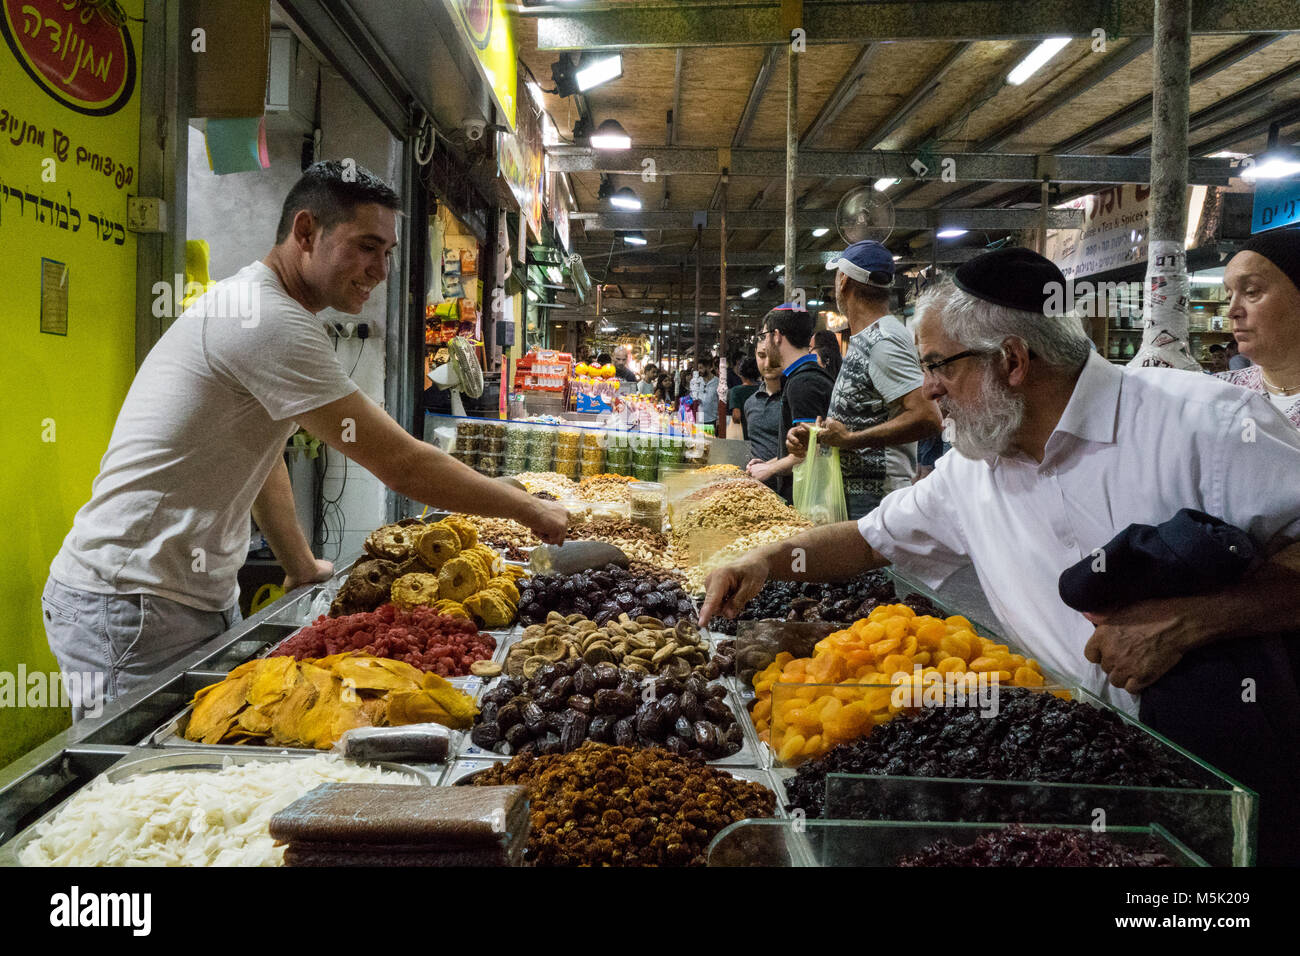 A man asking about dates on a driet fruits and nuts stall at the Mahane Yehuda Market at Jerusalem. Stock Photo